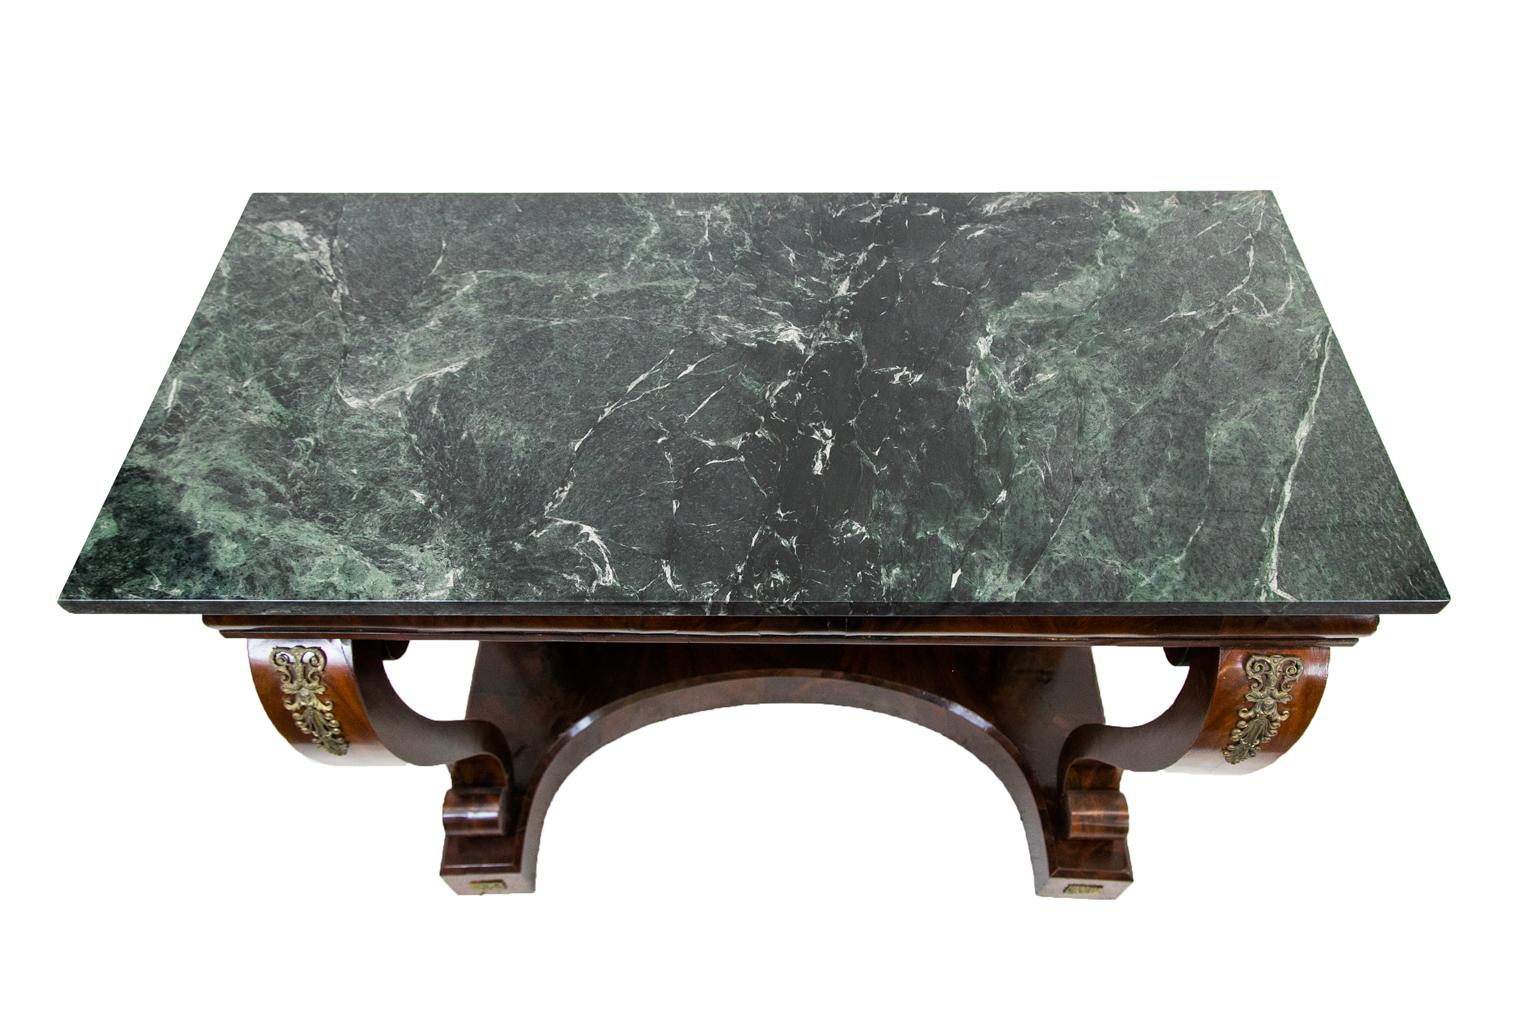 English Regency Verde marble top console table is fully veneered with crotch mahogany. The concave platform base has a mirrored back framed with ogee molding.